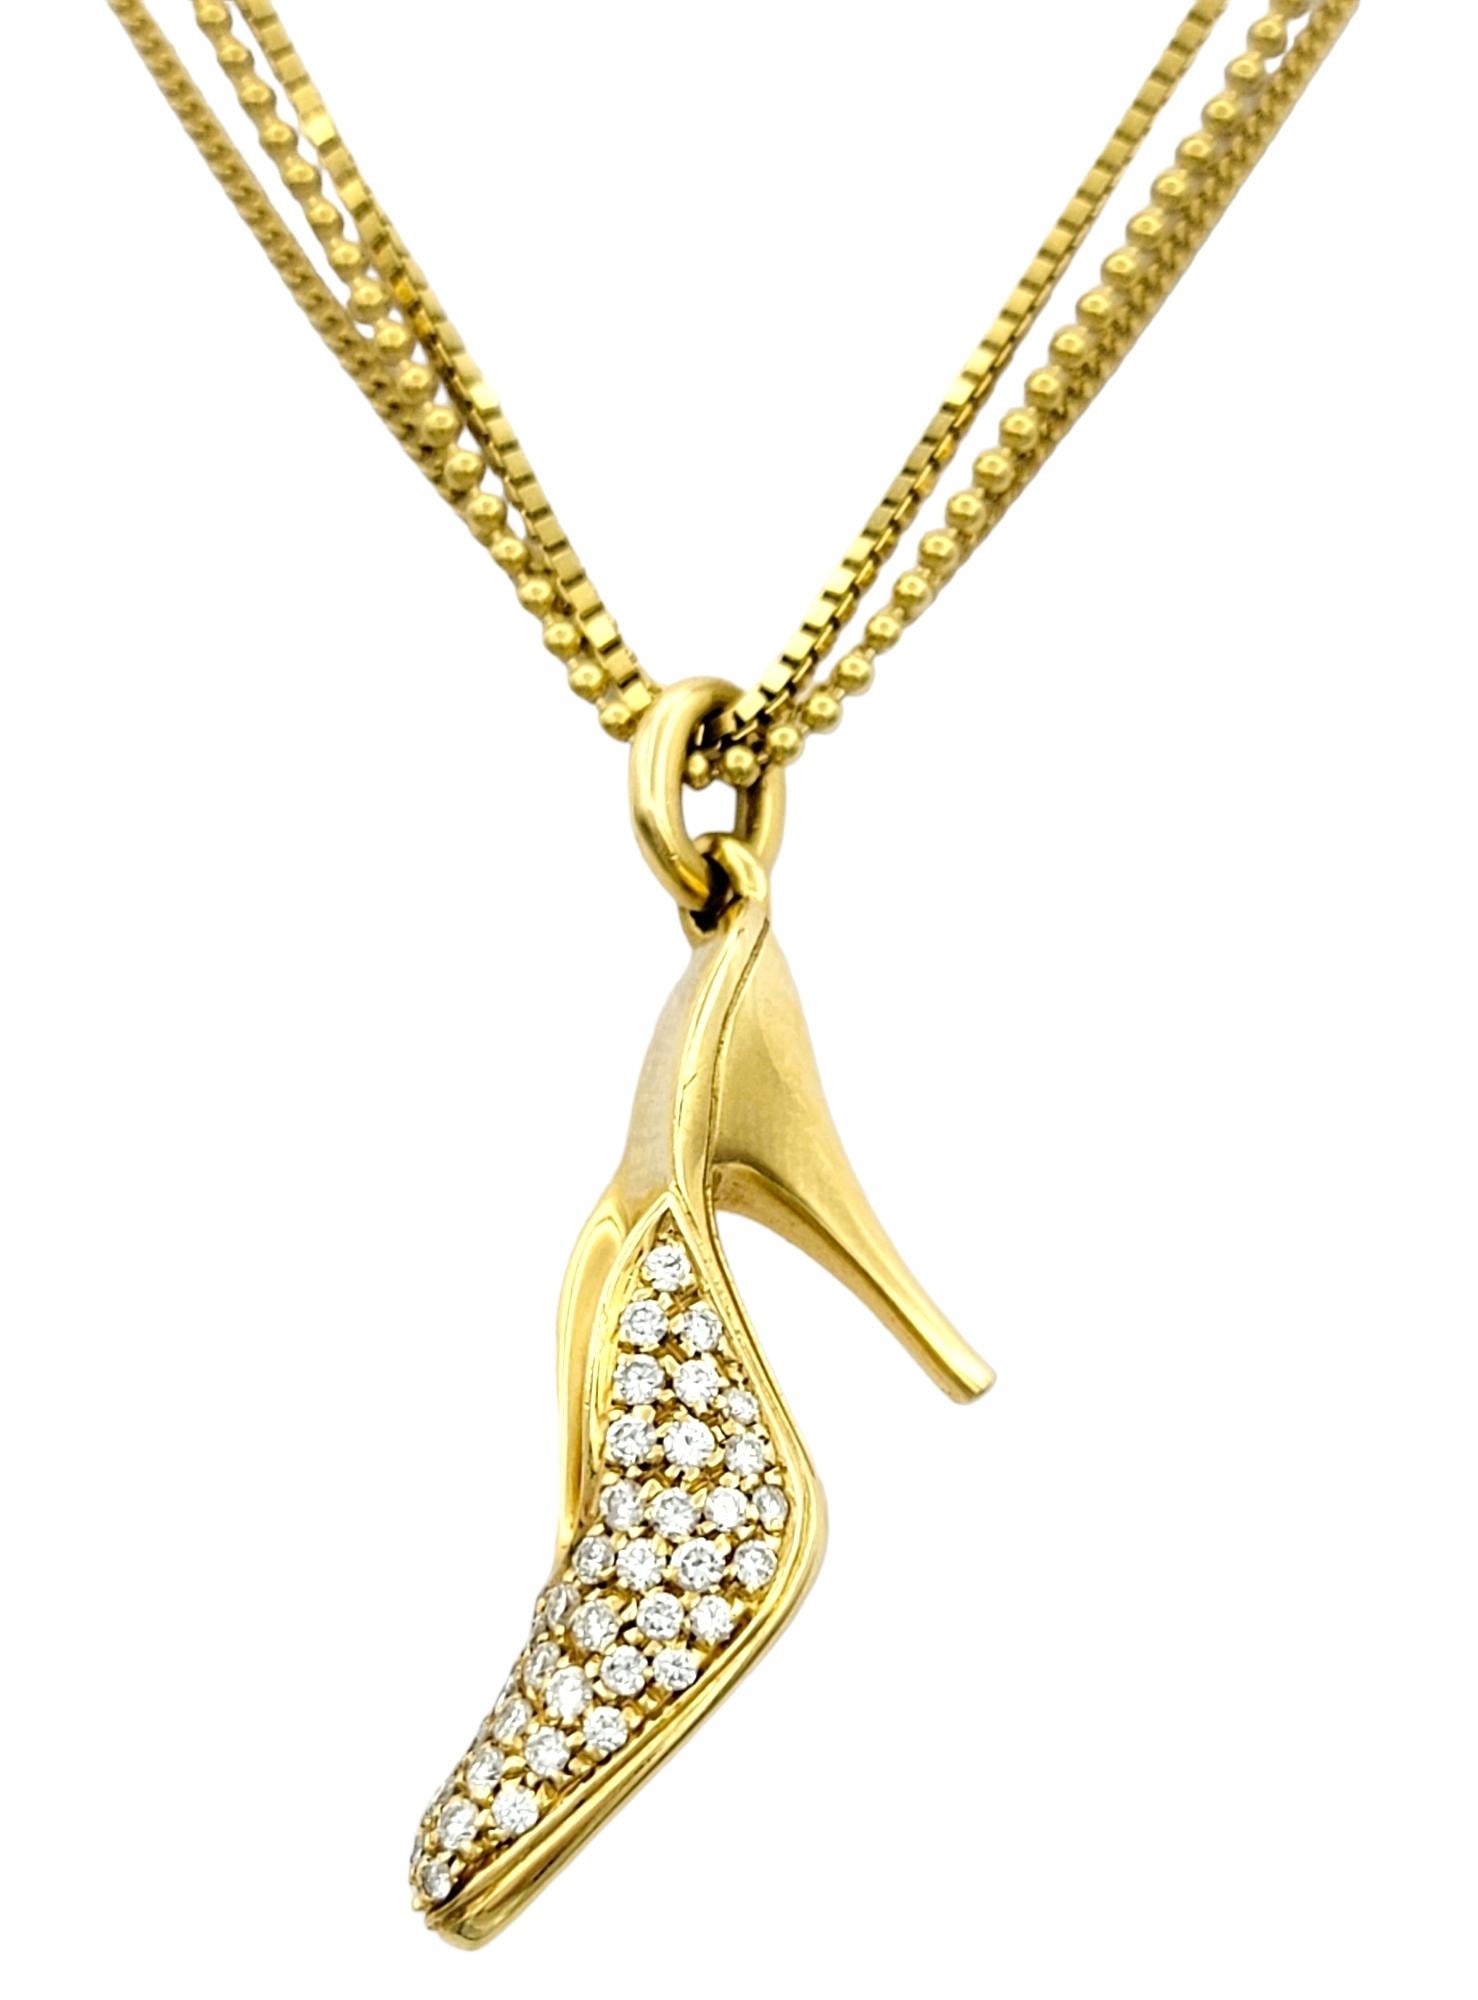 This playful 18 karat yellow gold pendant necklace is a dazzling embodiment of style, sophistication, and innovation, created by Alfieri & St. John. 

The pendant itself takes the form of an iconic stiletto high heel, a symbol of elegance and